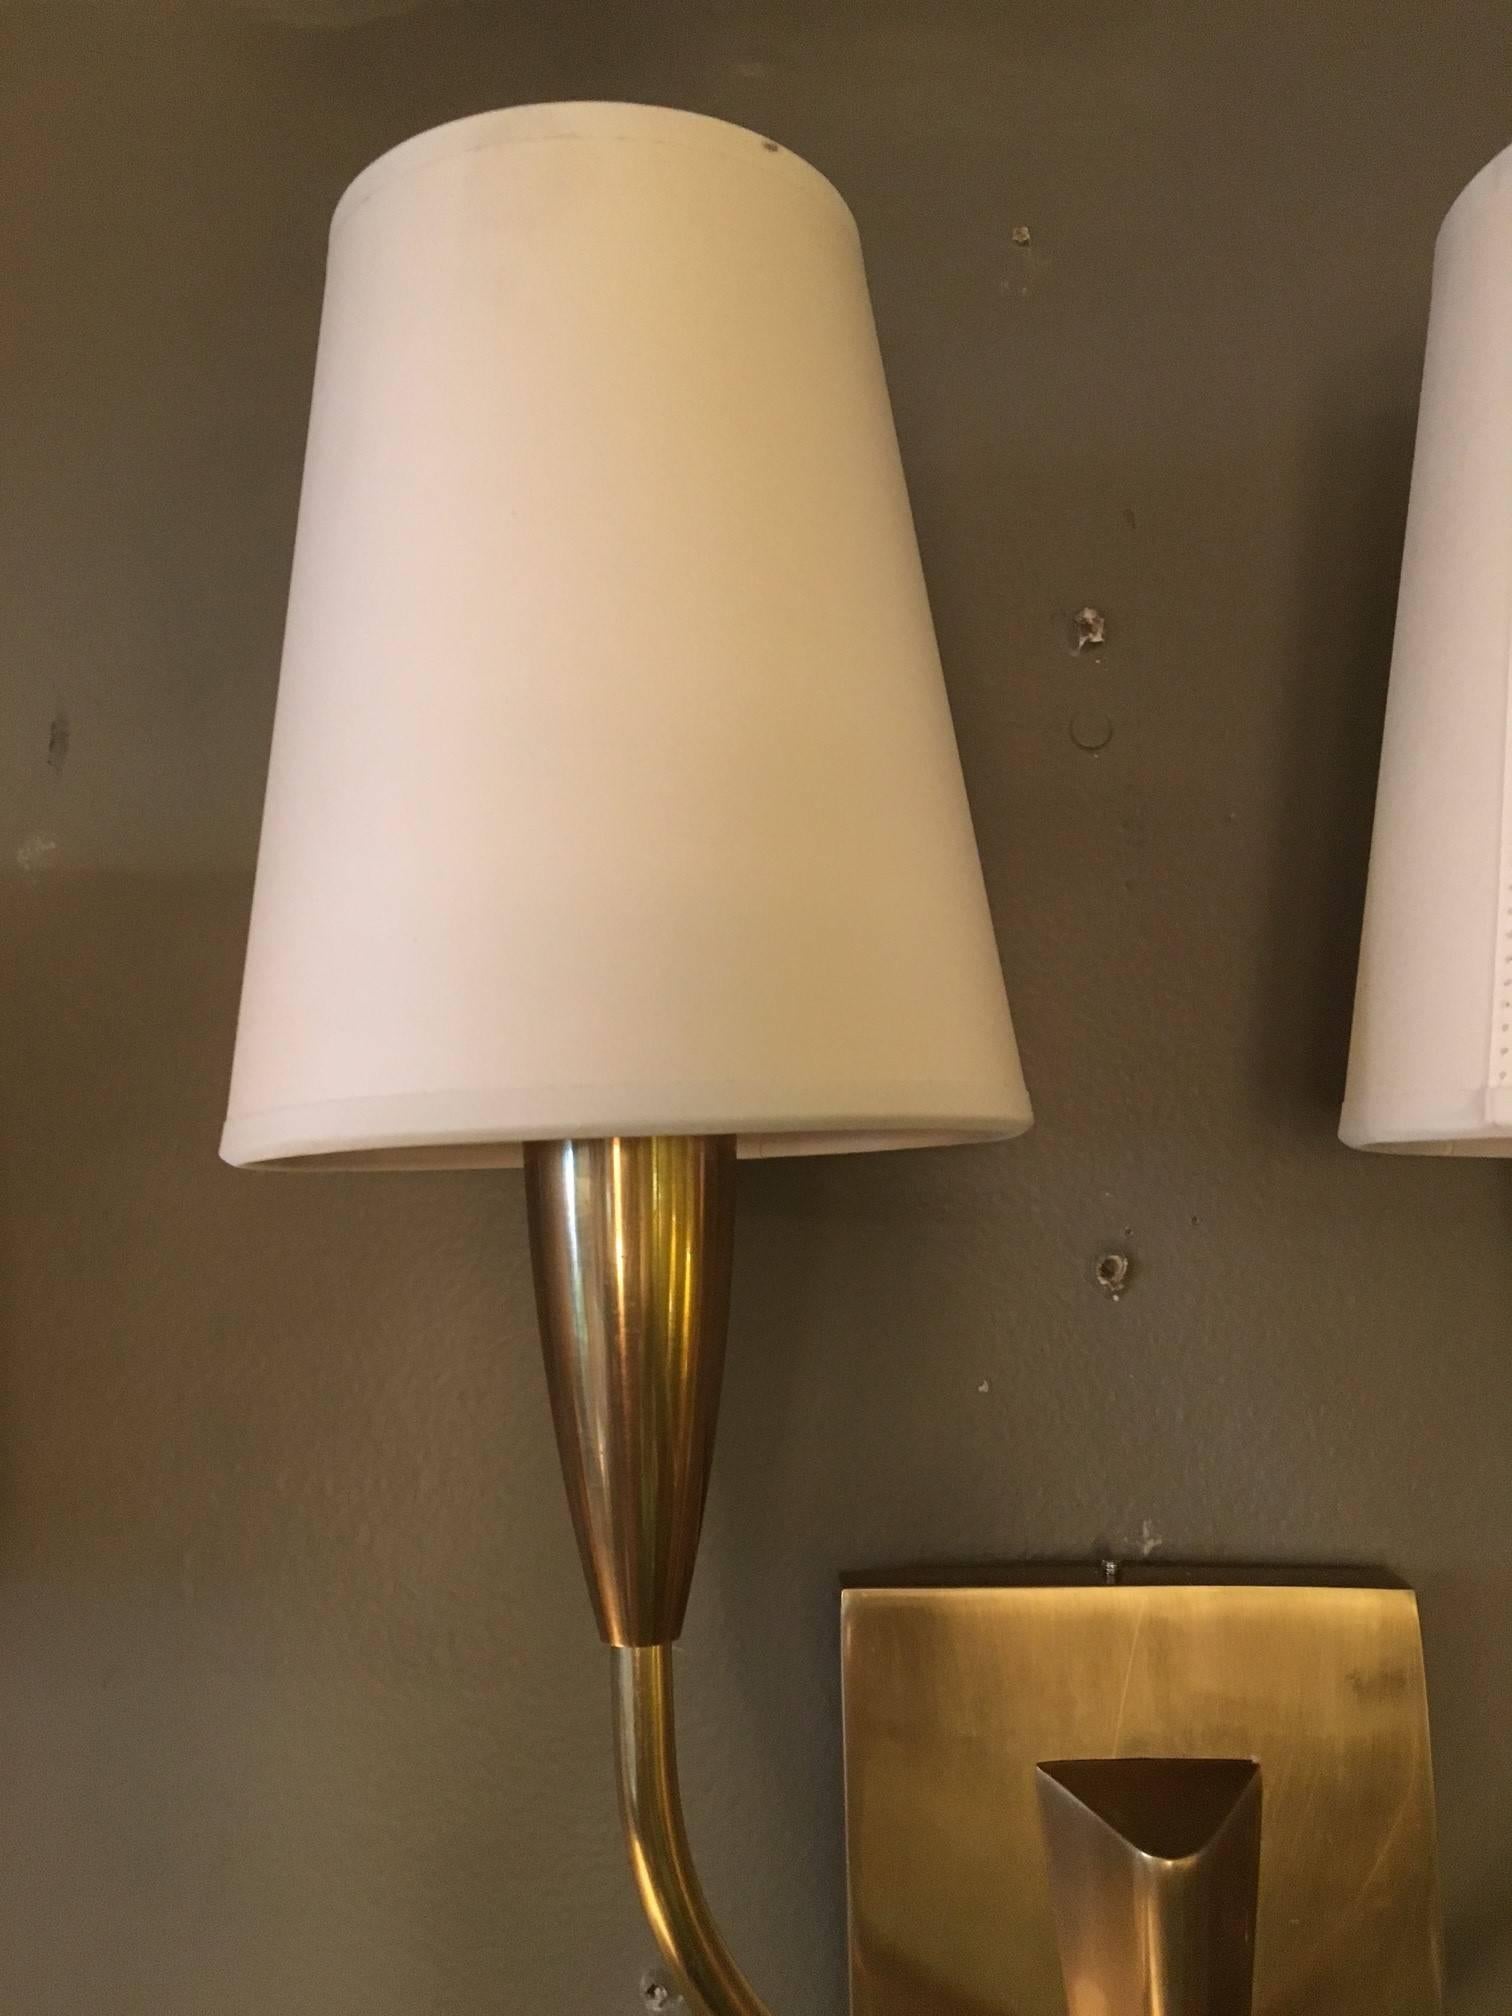 Late 20th Century Pair of Wall Sconces with Shades